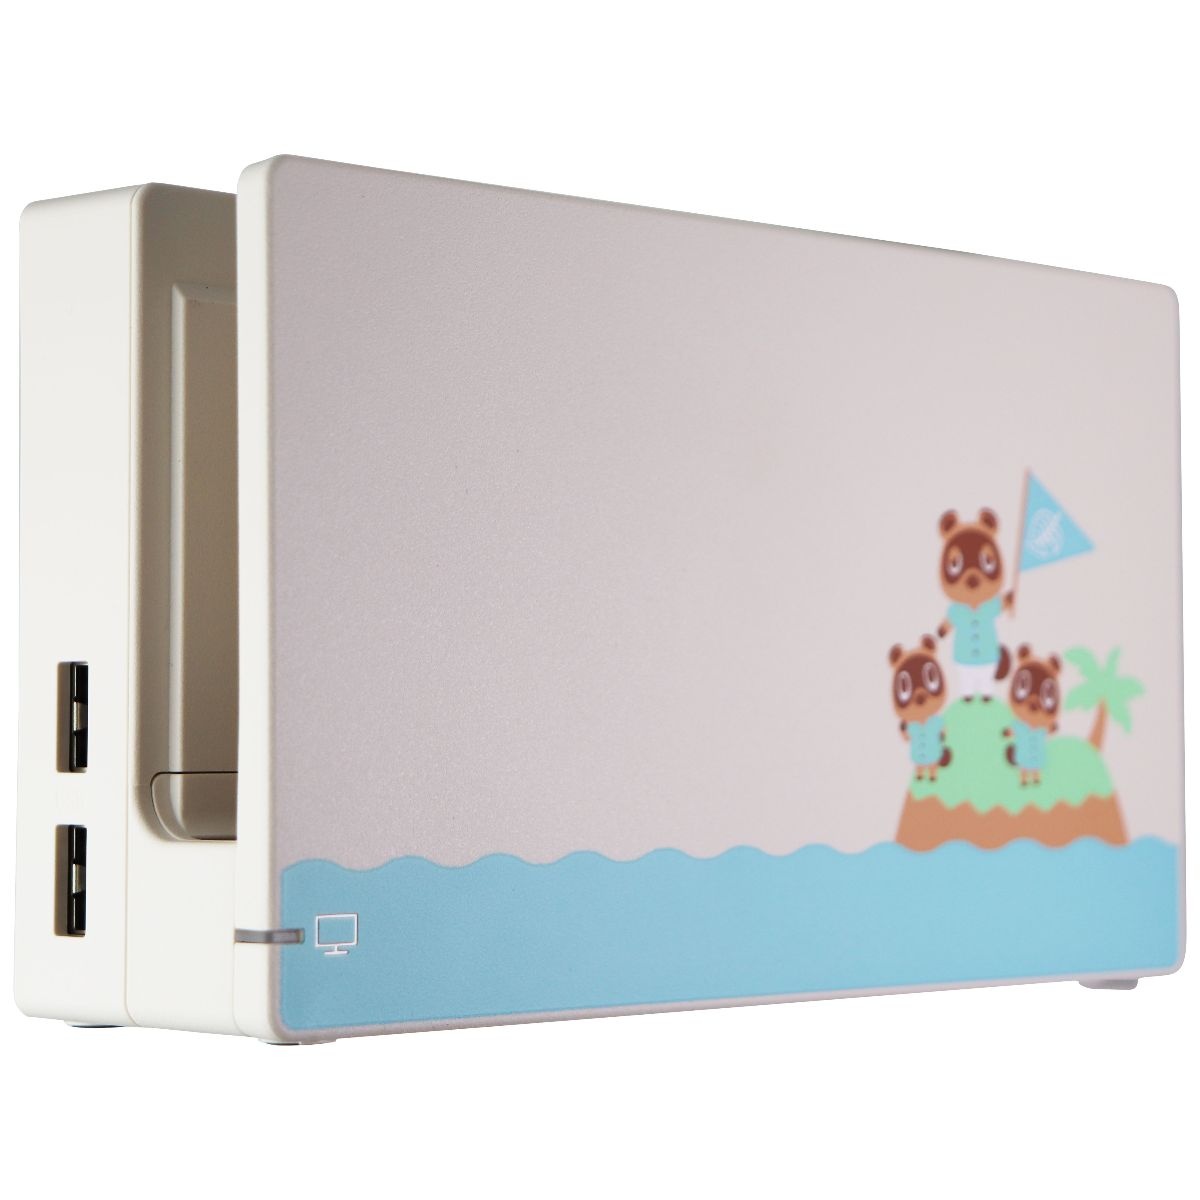 Pre-Owned Nintendo Switch Dock - Animal Crossing: New Horizons Edition (HAC-007) Dock Only (Refurbished: Good) - image 2 of 5